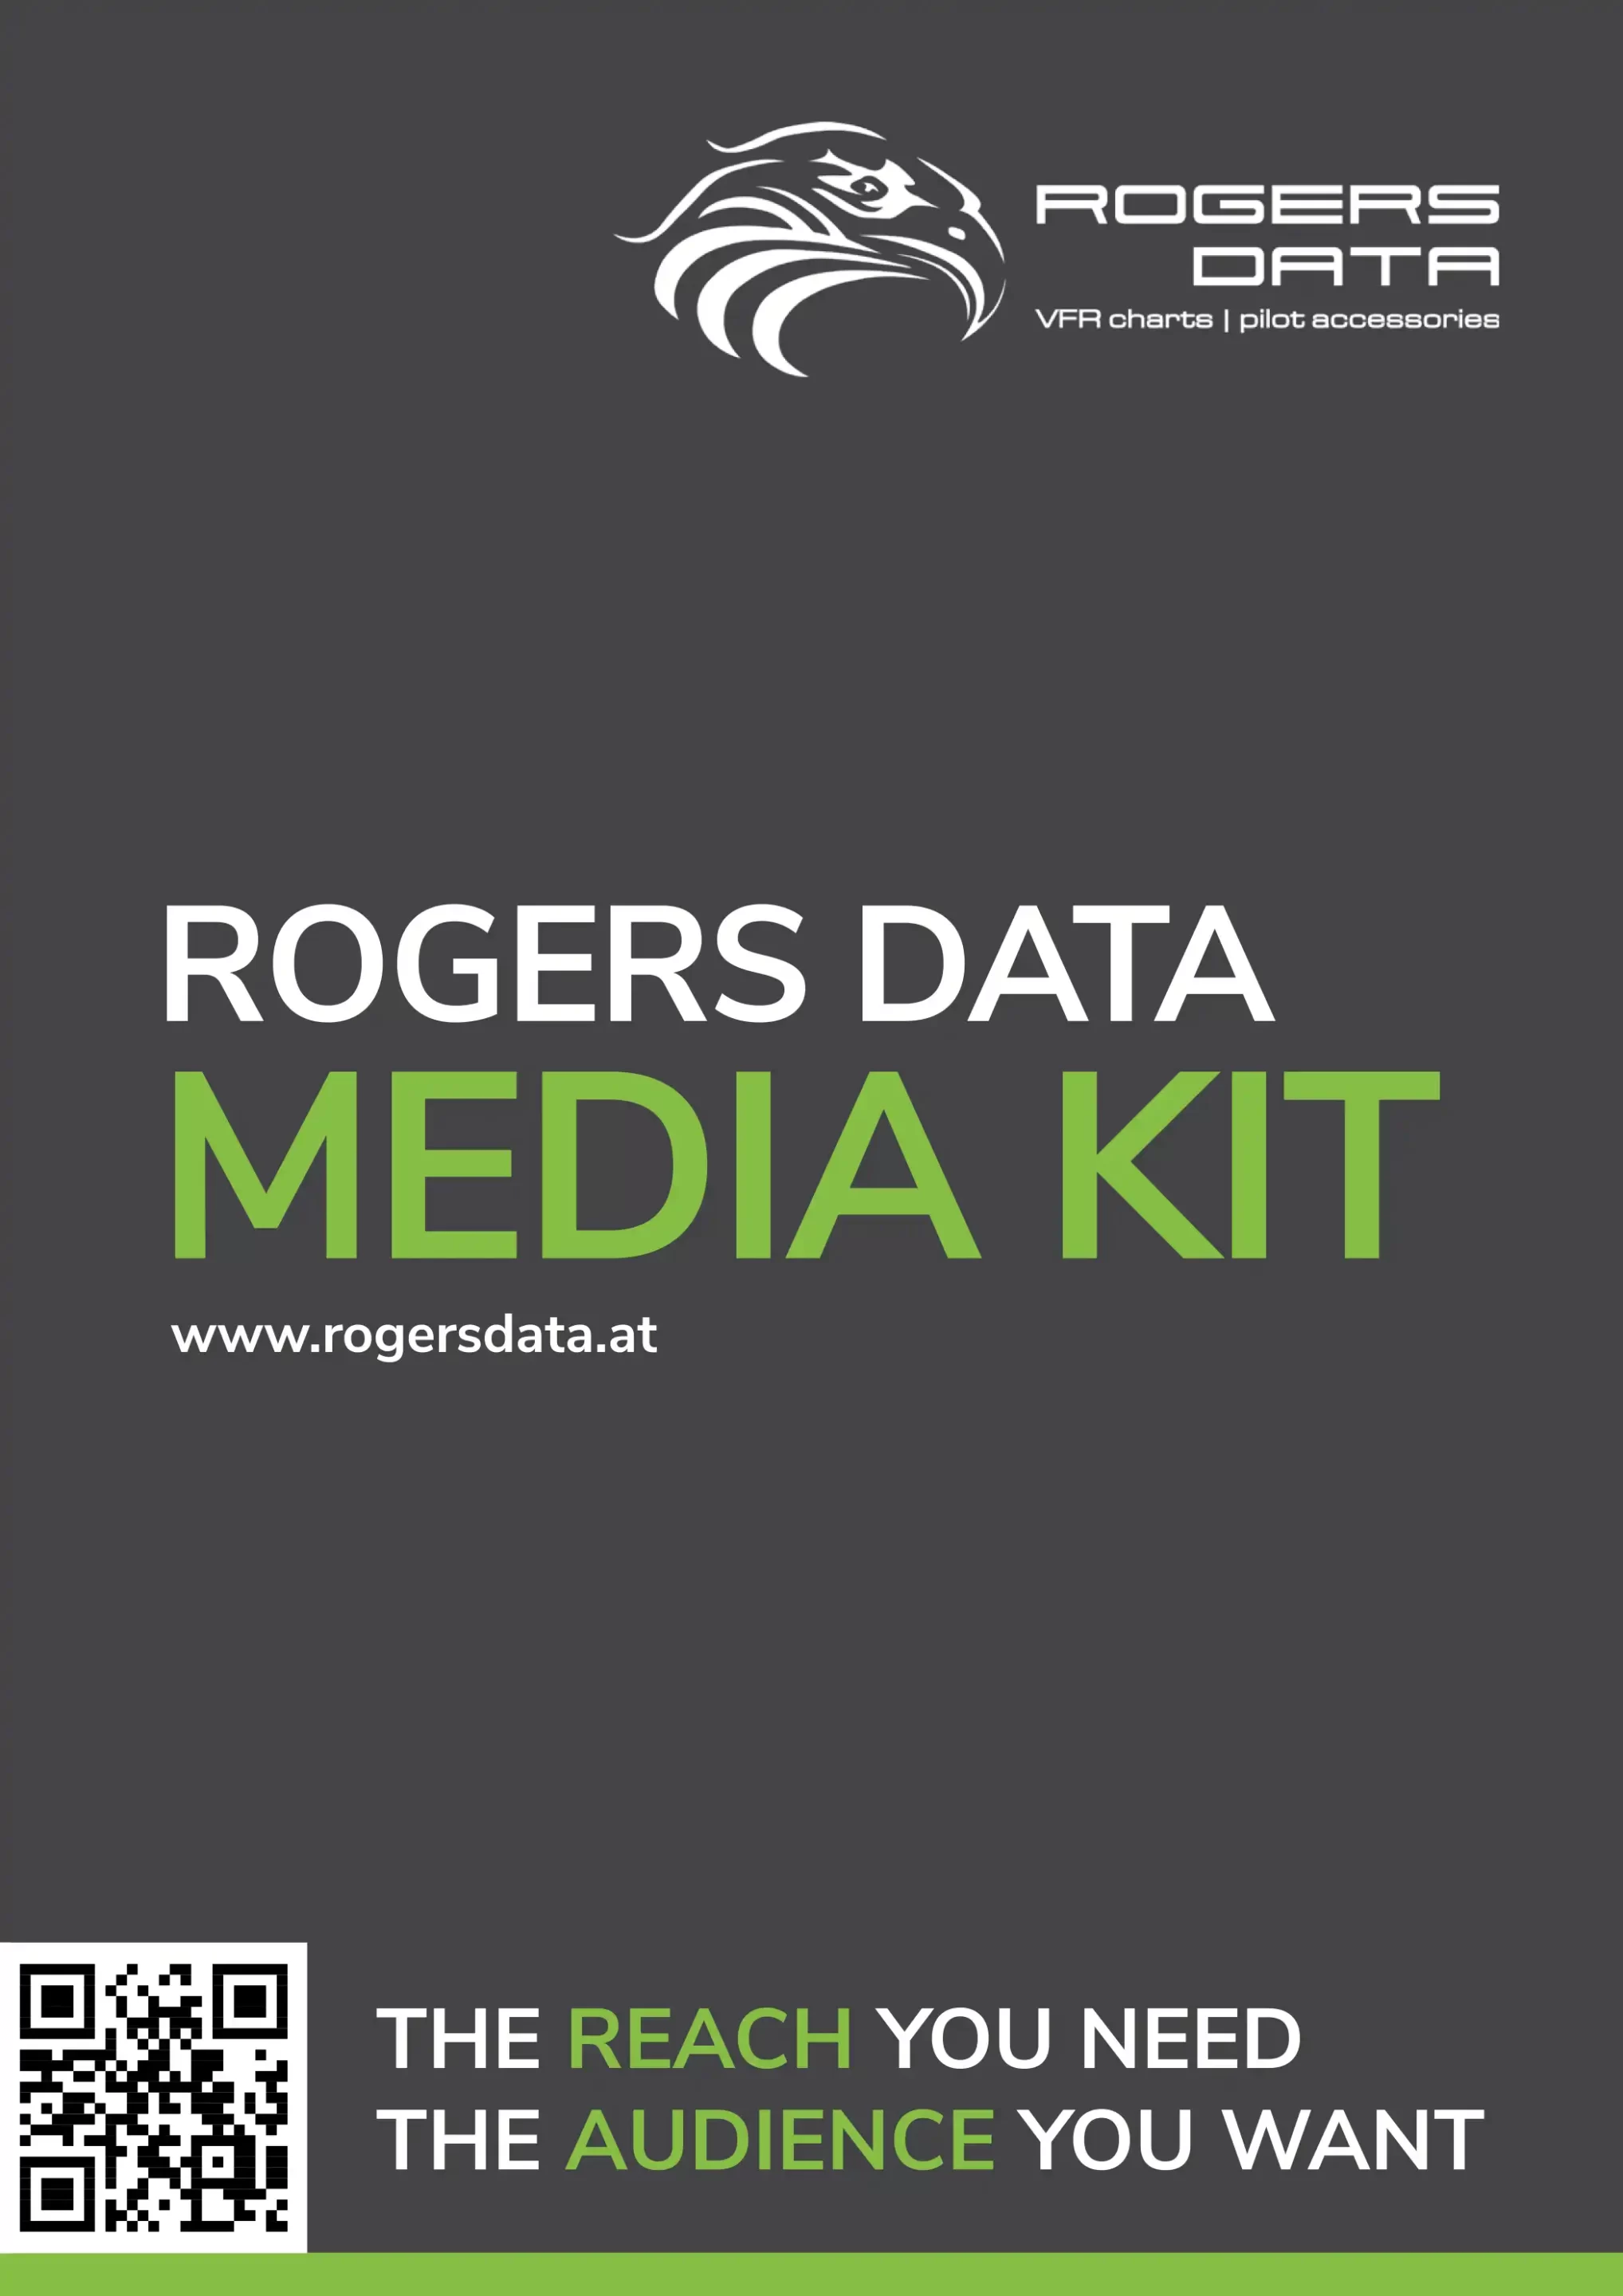 Advertising at Rogers Data